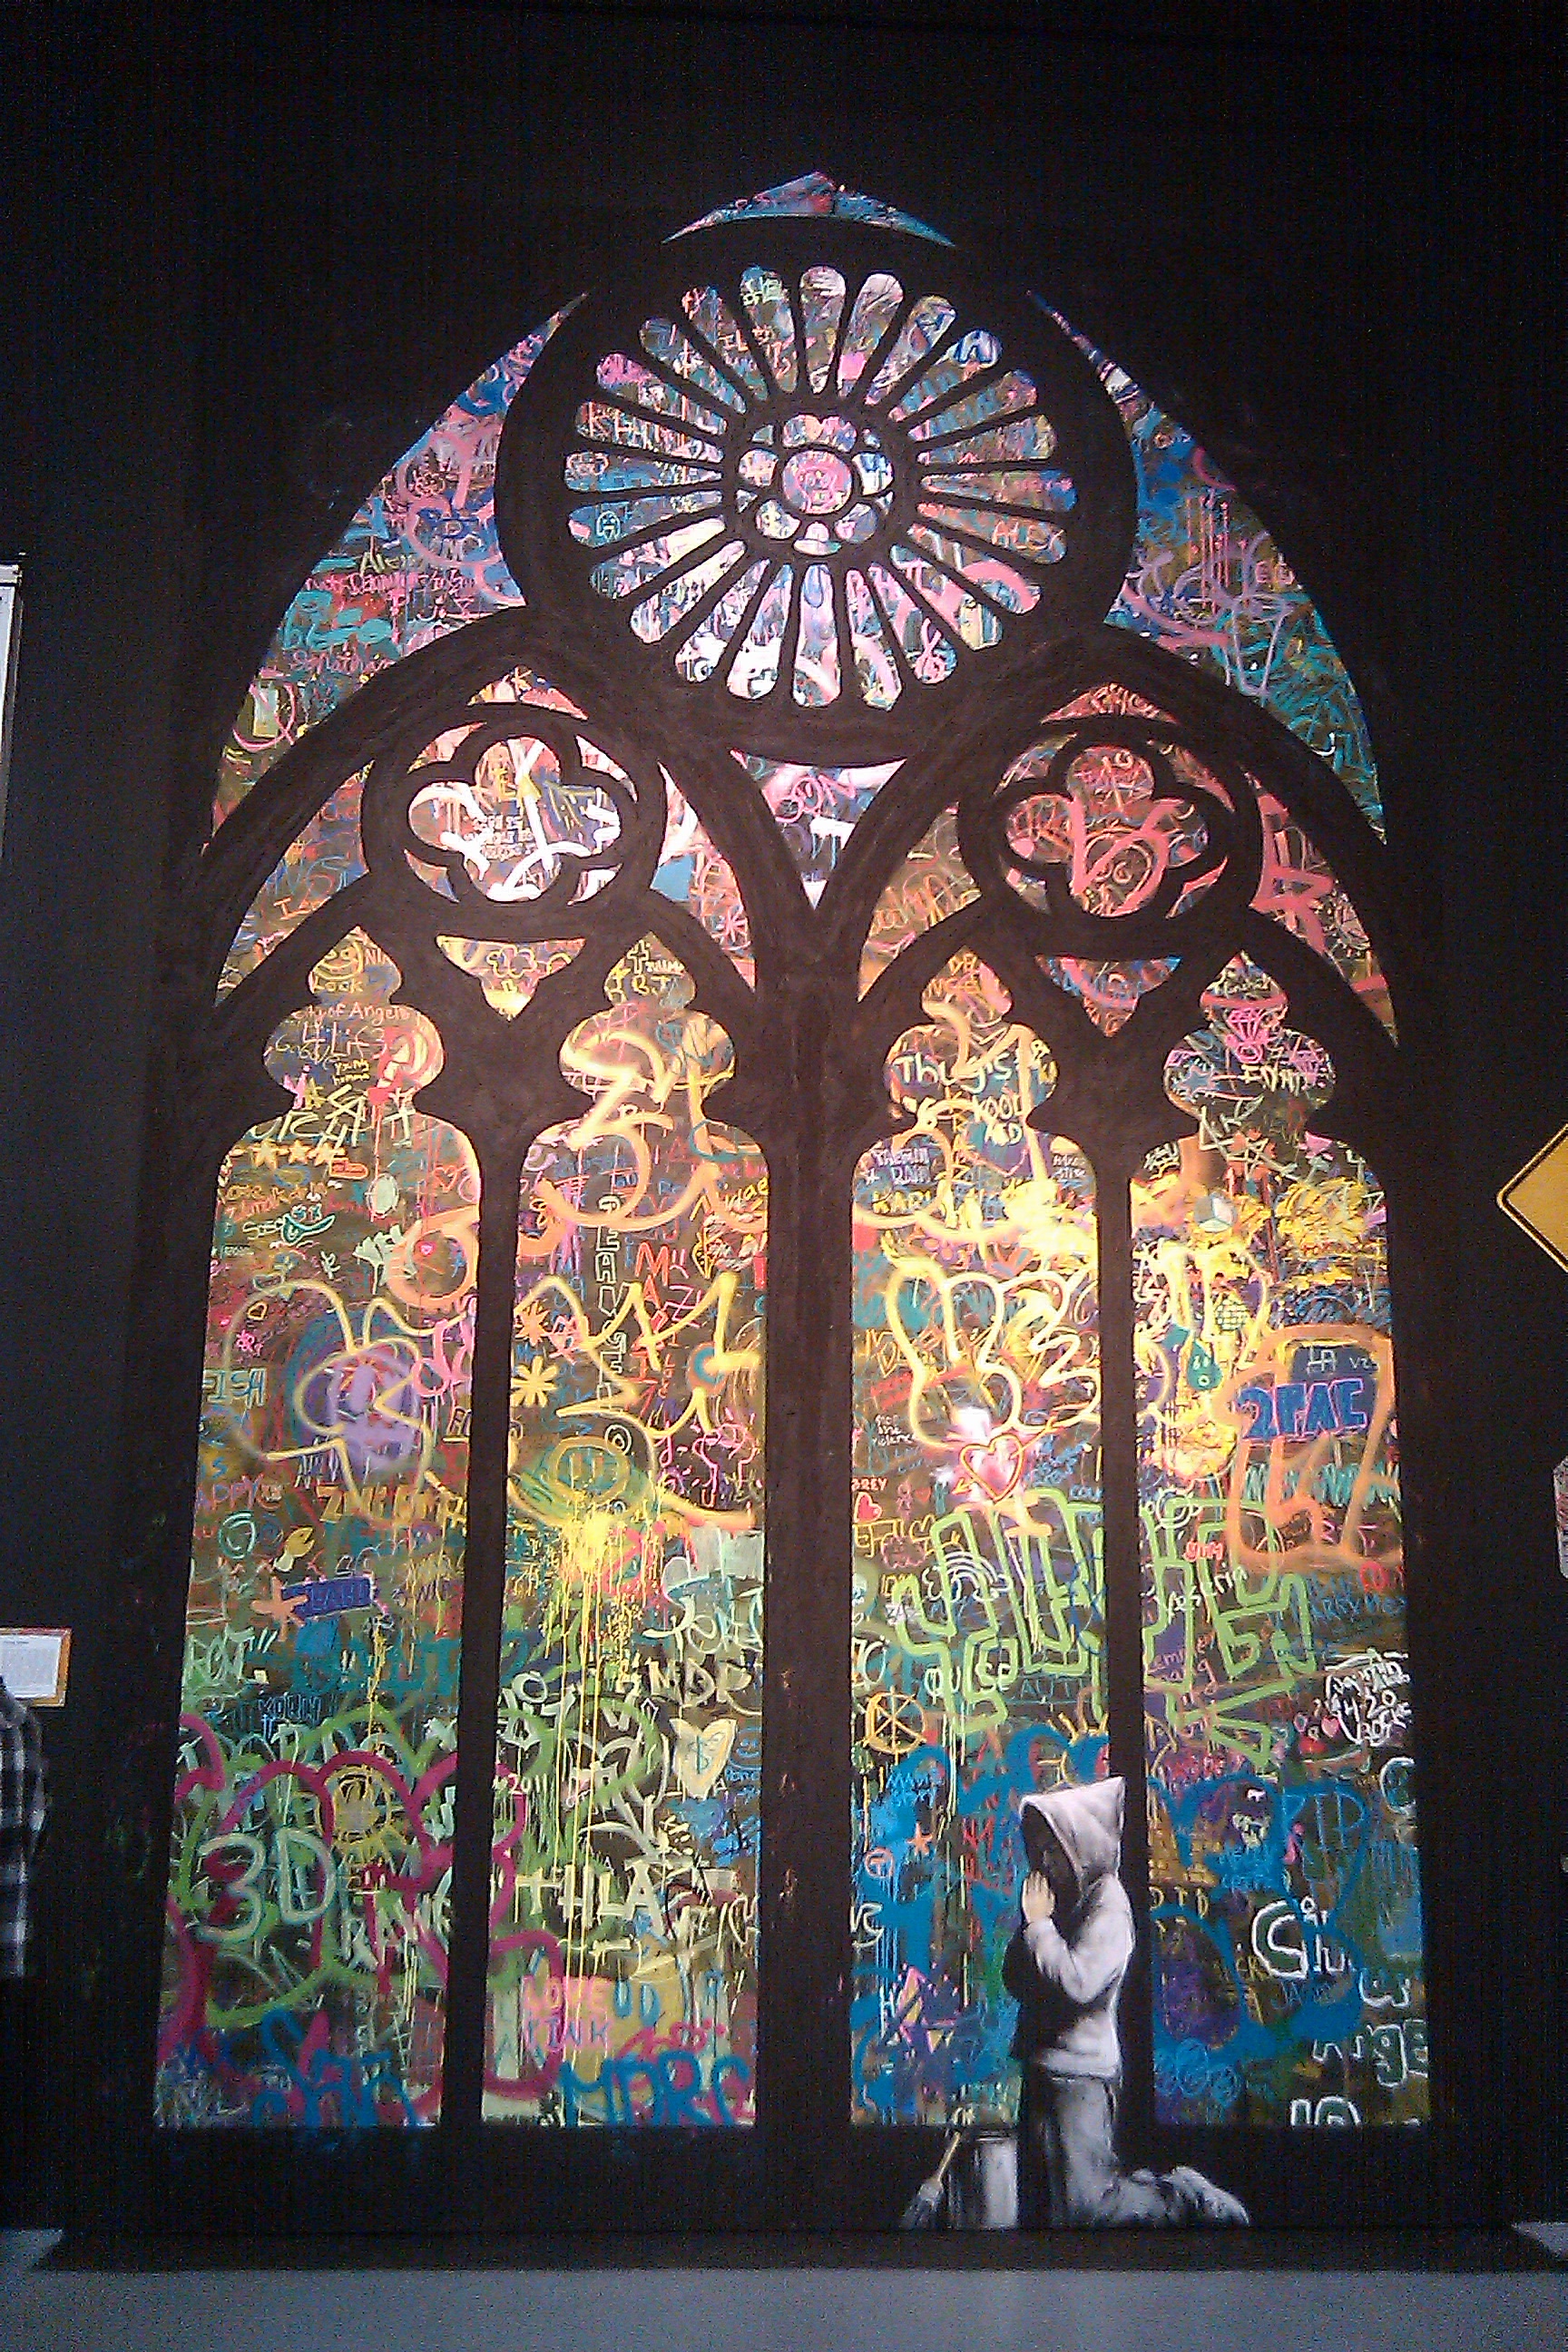 stained glass window art